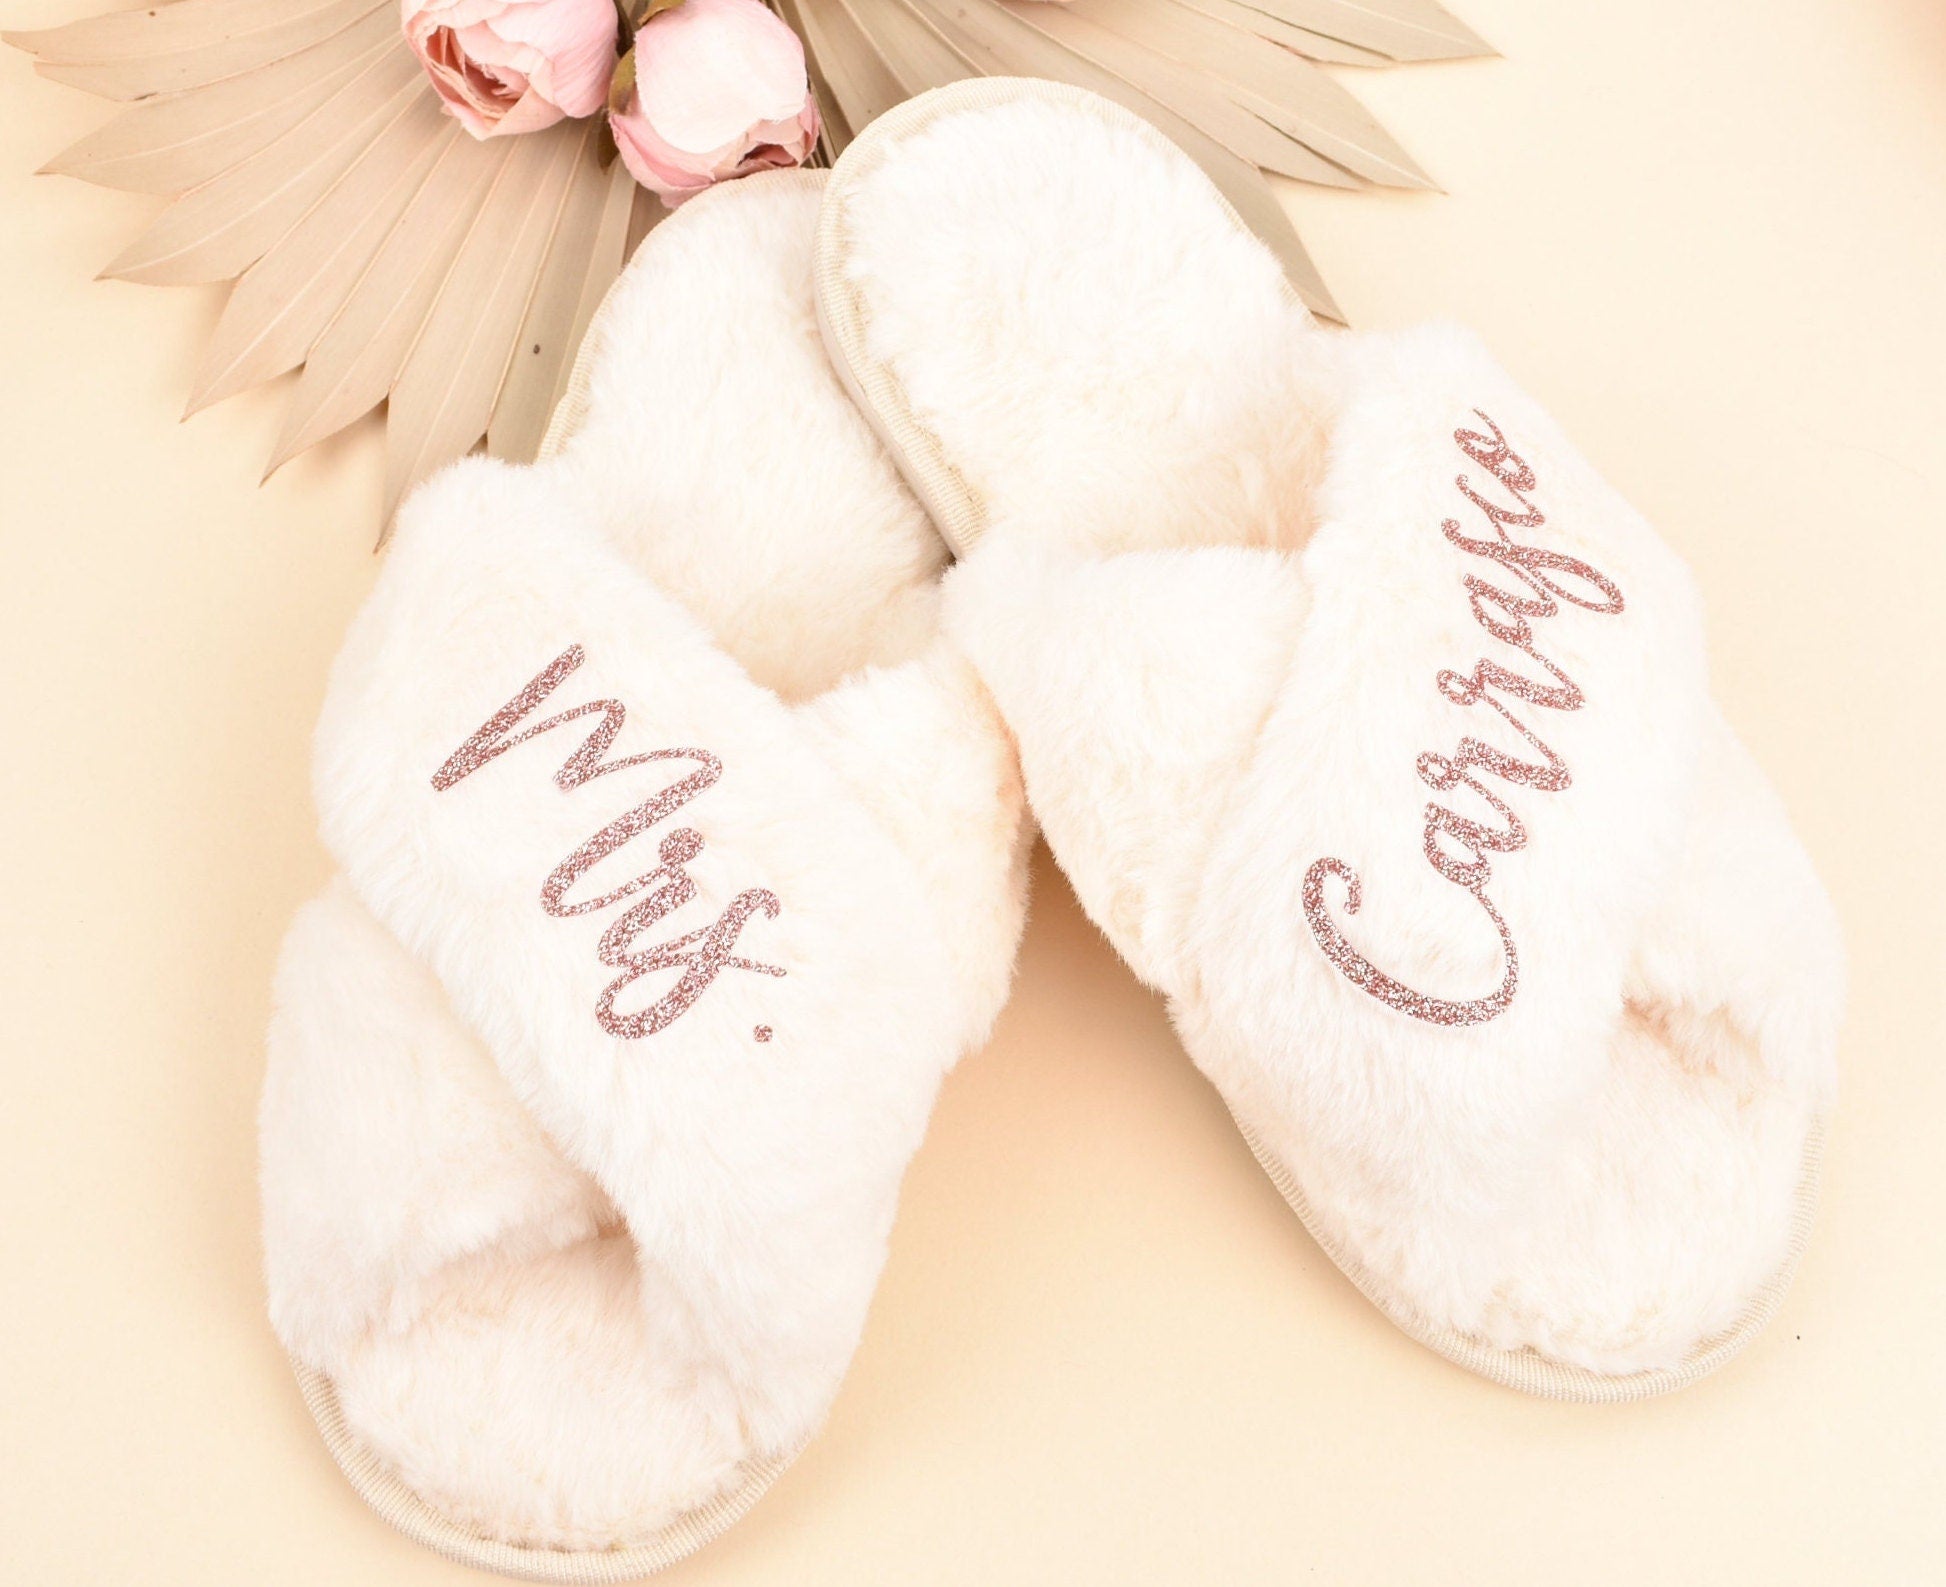 Mrs Bride Slippers for Wedding Bridal Slippers Custom Gift for Bride to Be Personalized Wedding Gift for Bride Honeymoon Gift Fluffy Slipper